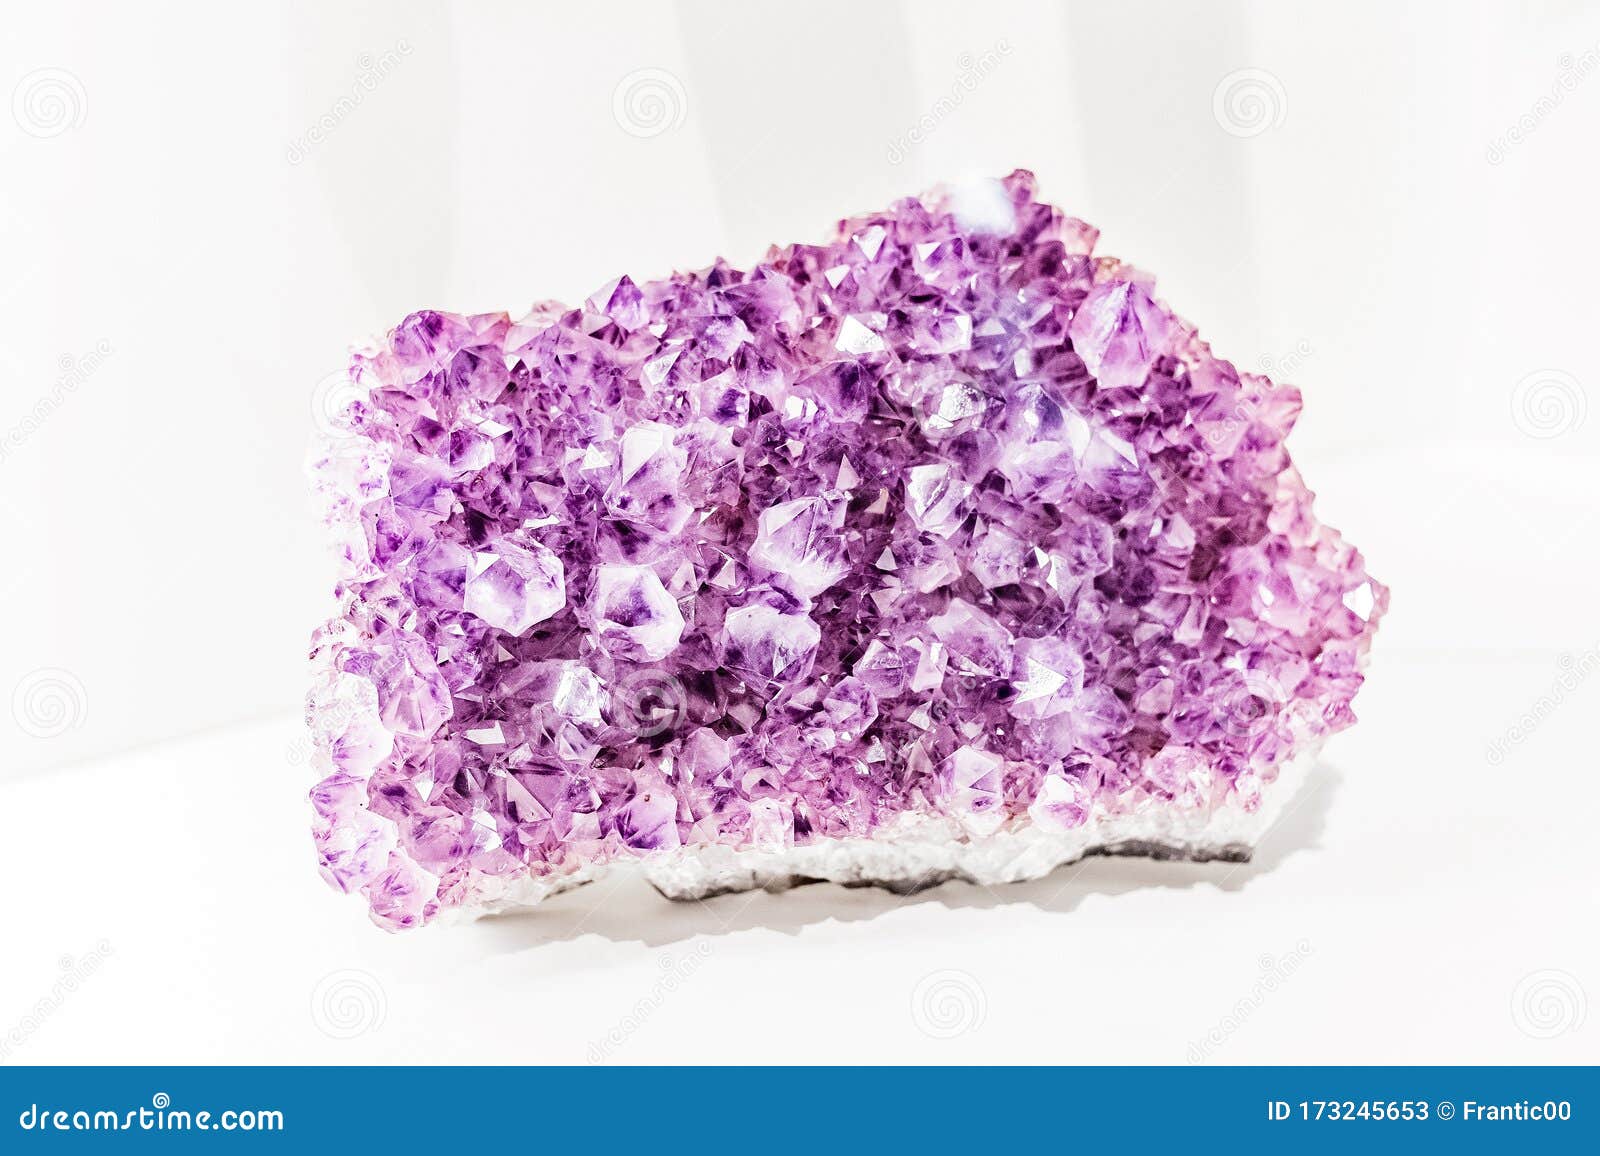 Amethyst crystals on white stock image. Image of jewelry - 173245653